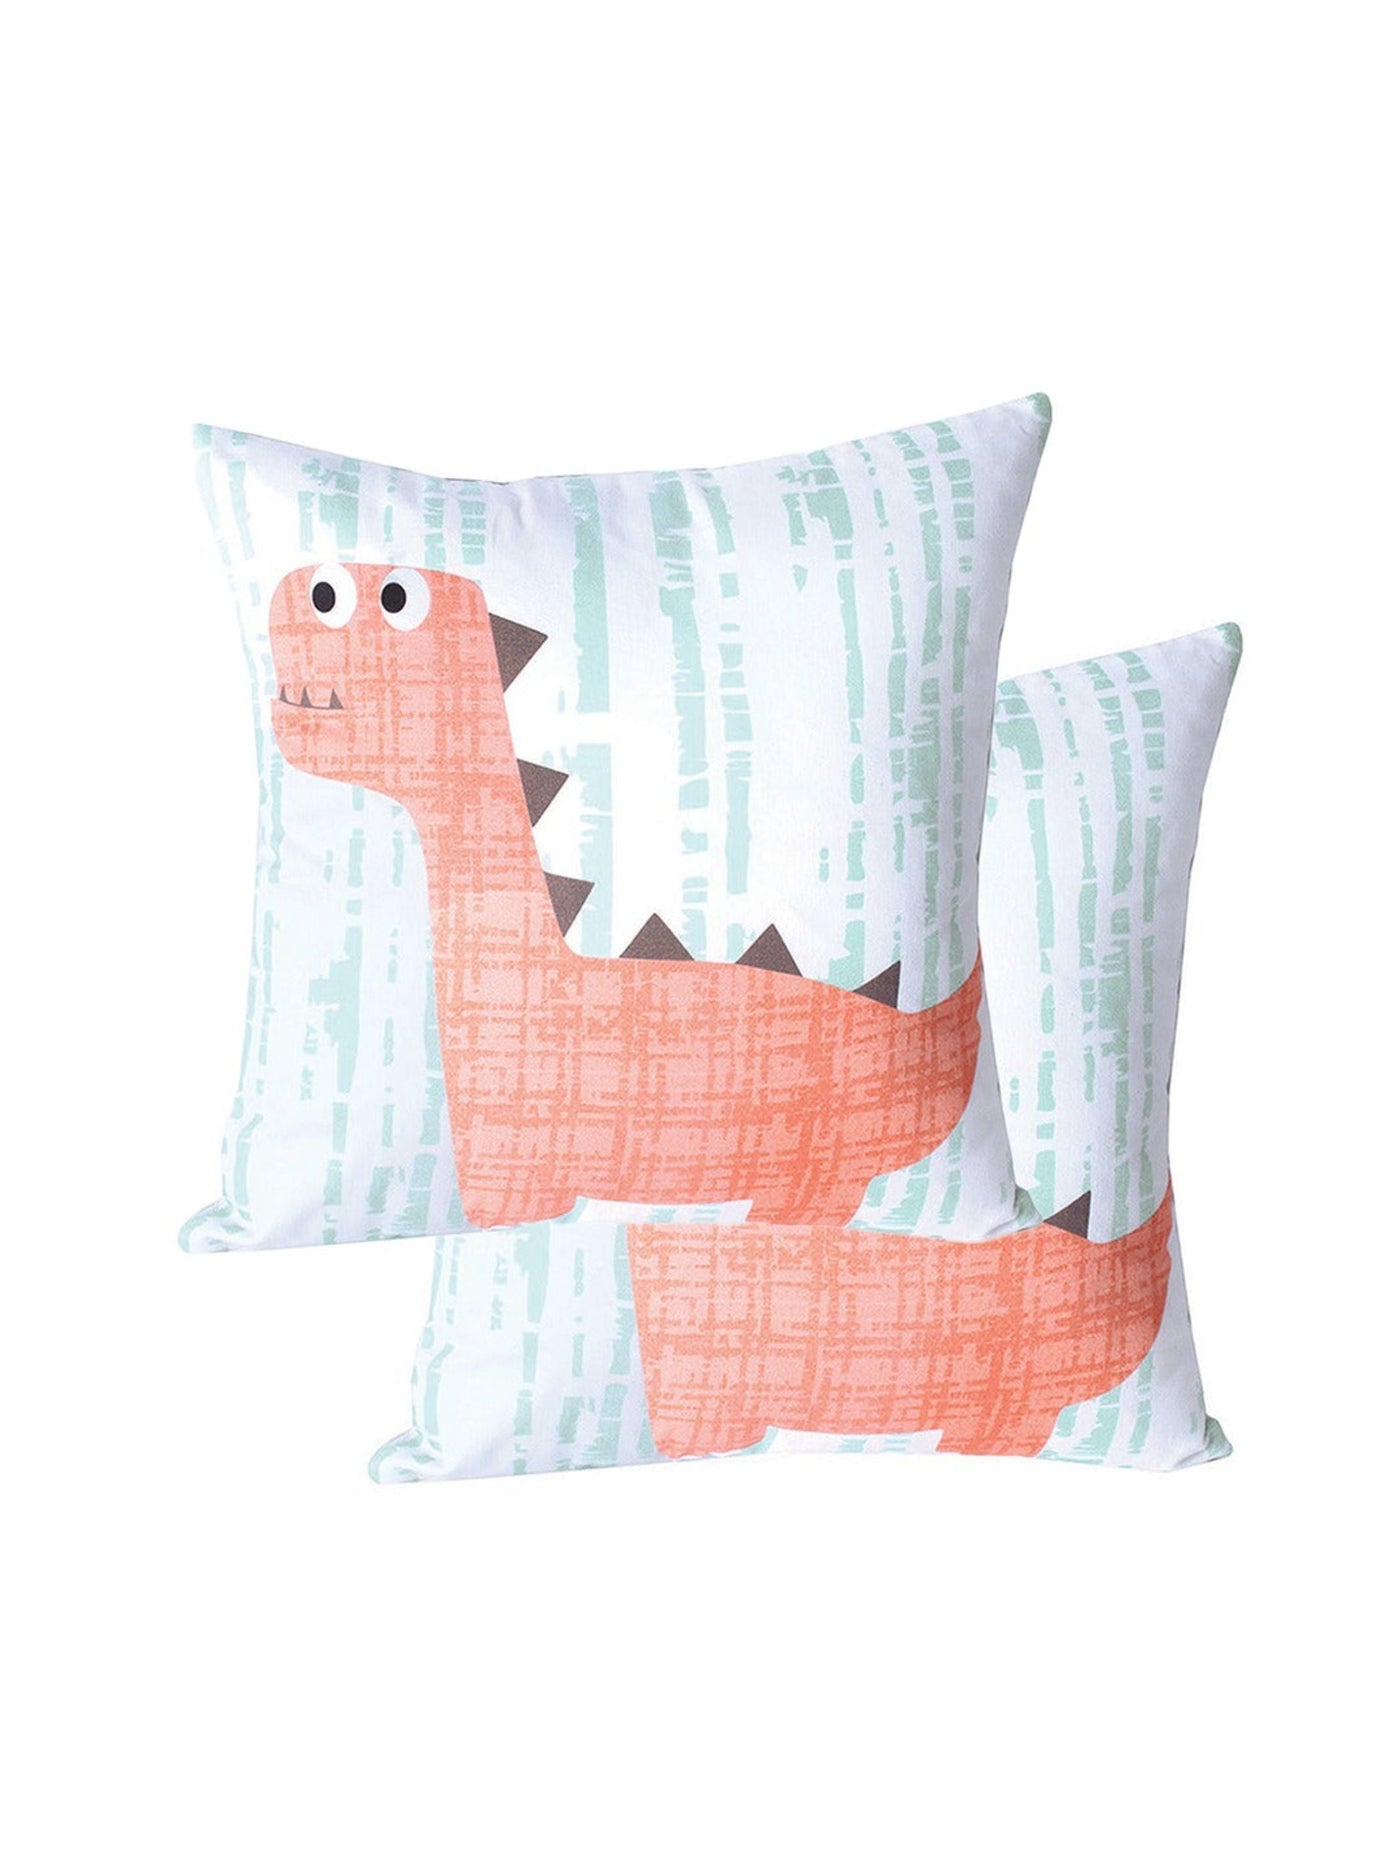 Cushion Cover - The Dino Surprise 100% Cotton Set Of 2 Shapes-Multi-8903773088898